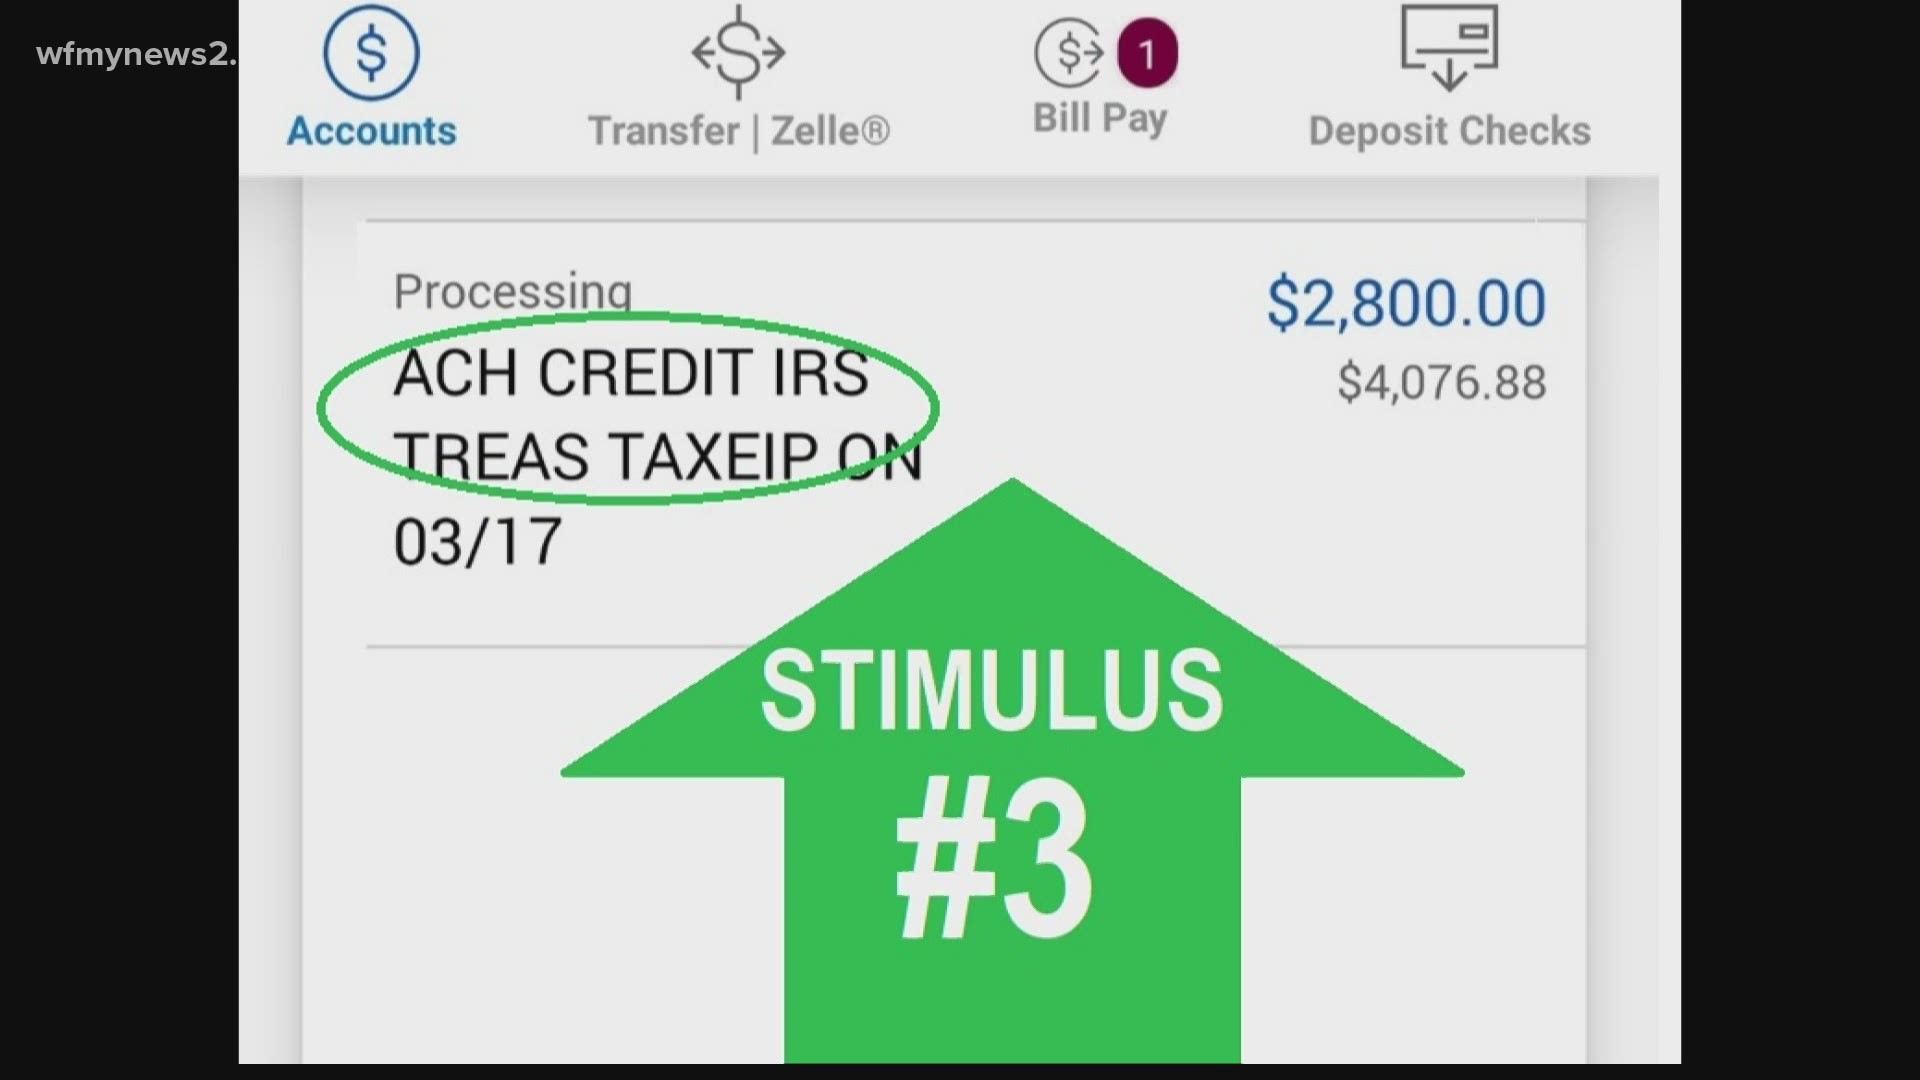 Direct deposits will be labeled 'ACH CREDIT IRS TREAS TAX EIP.'